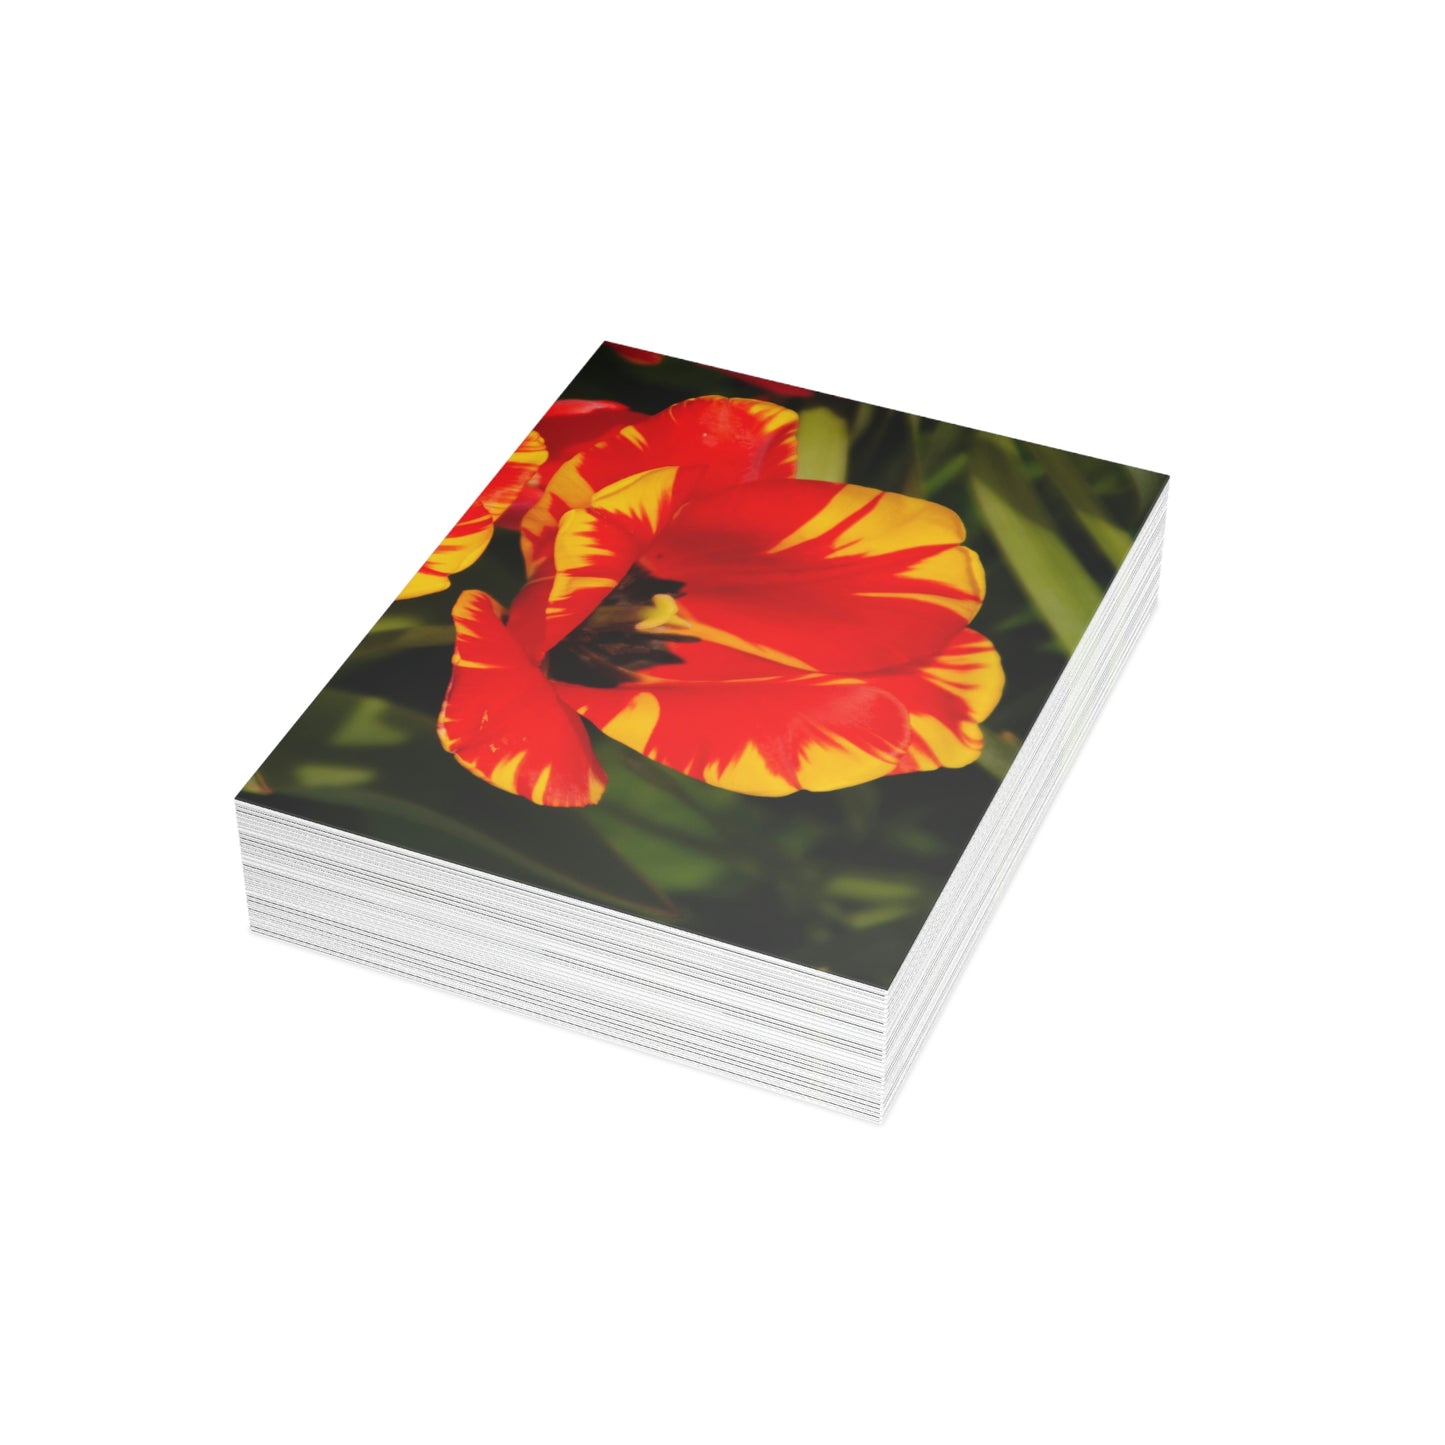 Flowers 09 Greeting Cards (1, 10, 30, and 50pcs)